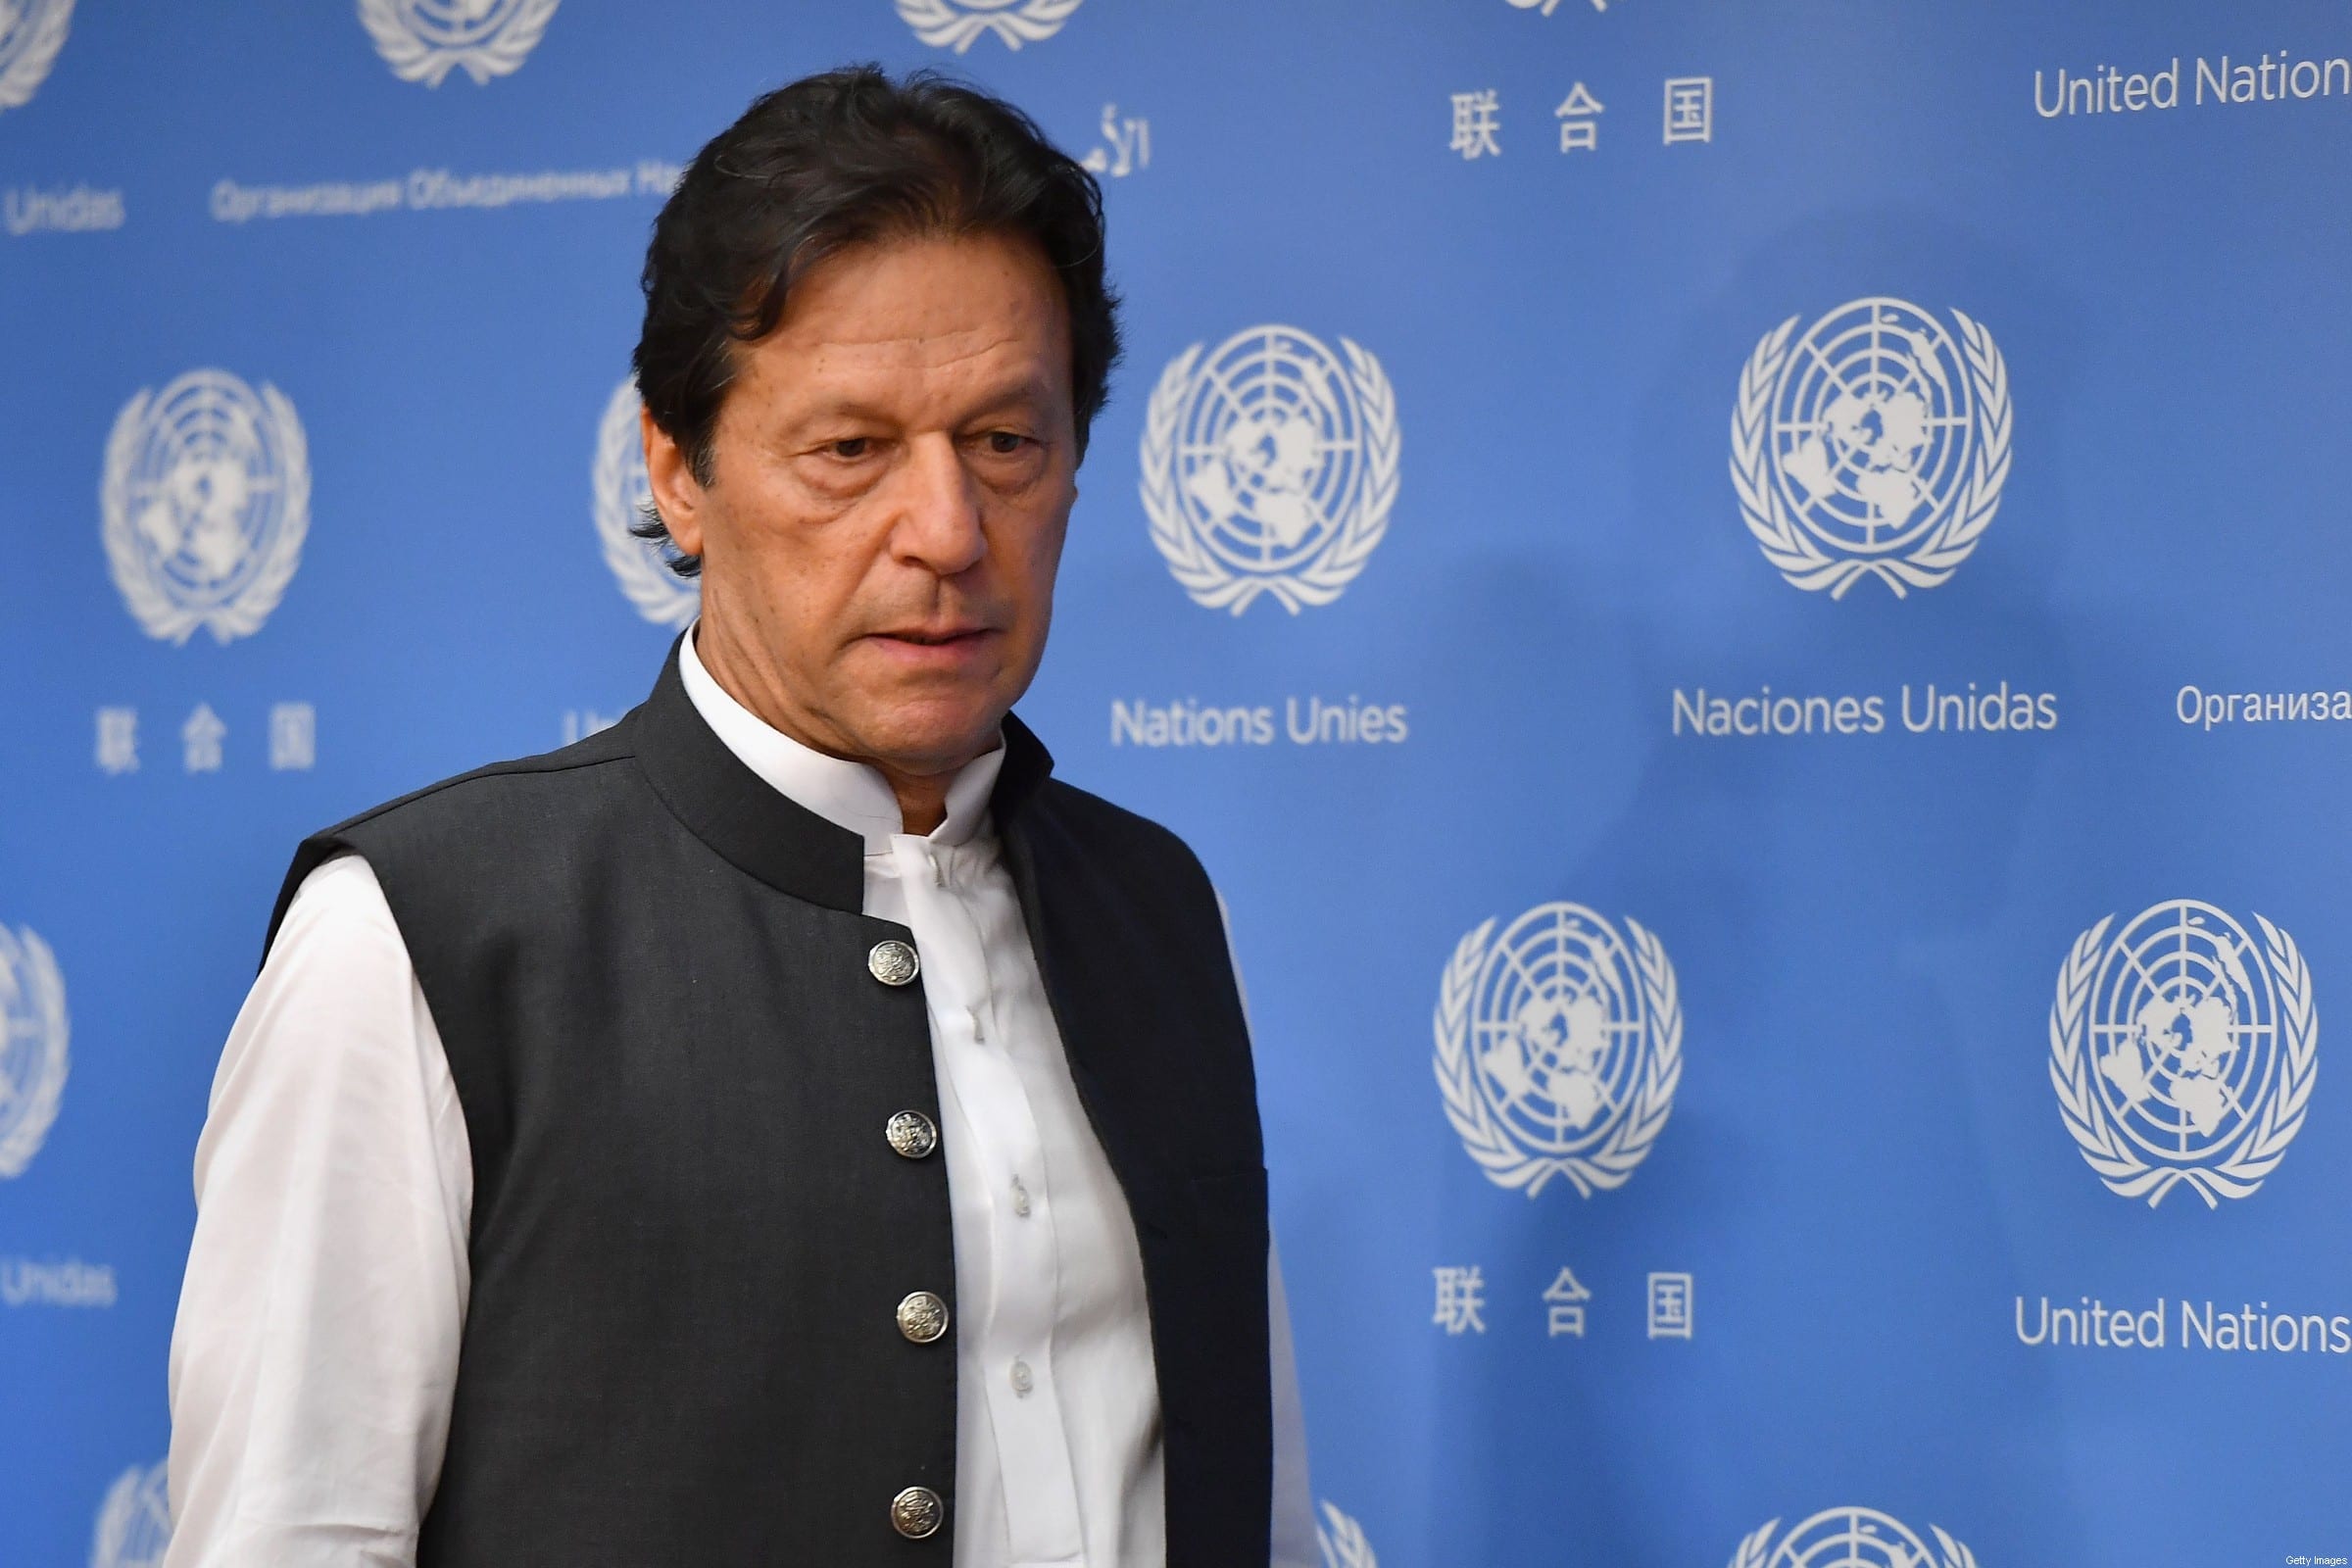 Pakistani Prime Minister Imran Khan in New York on 24 September 2019 [ANGELA WEISS/AFP/Getty Images]